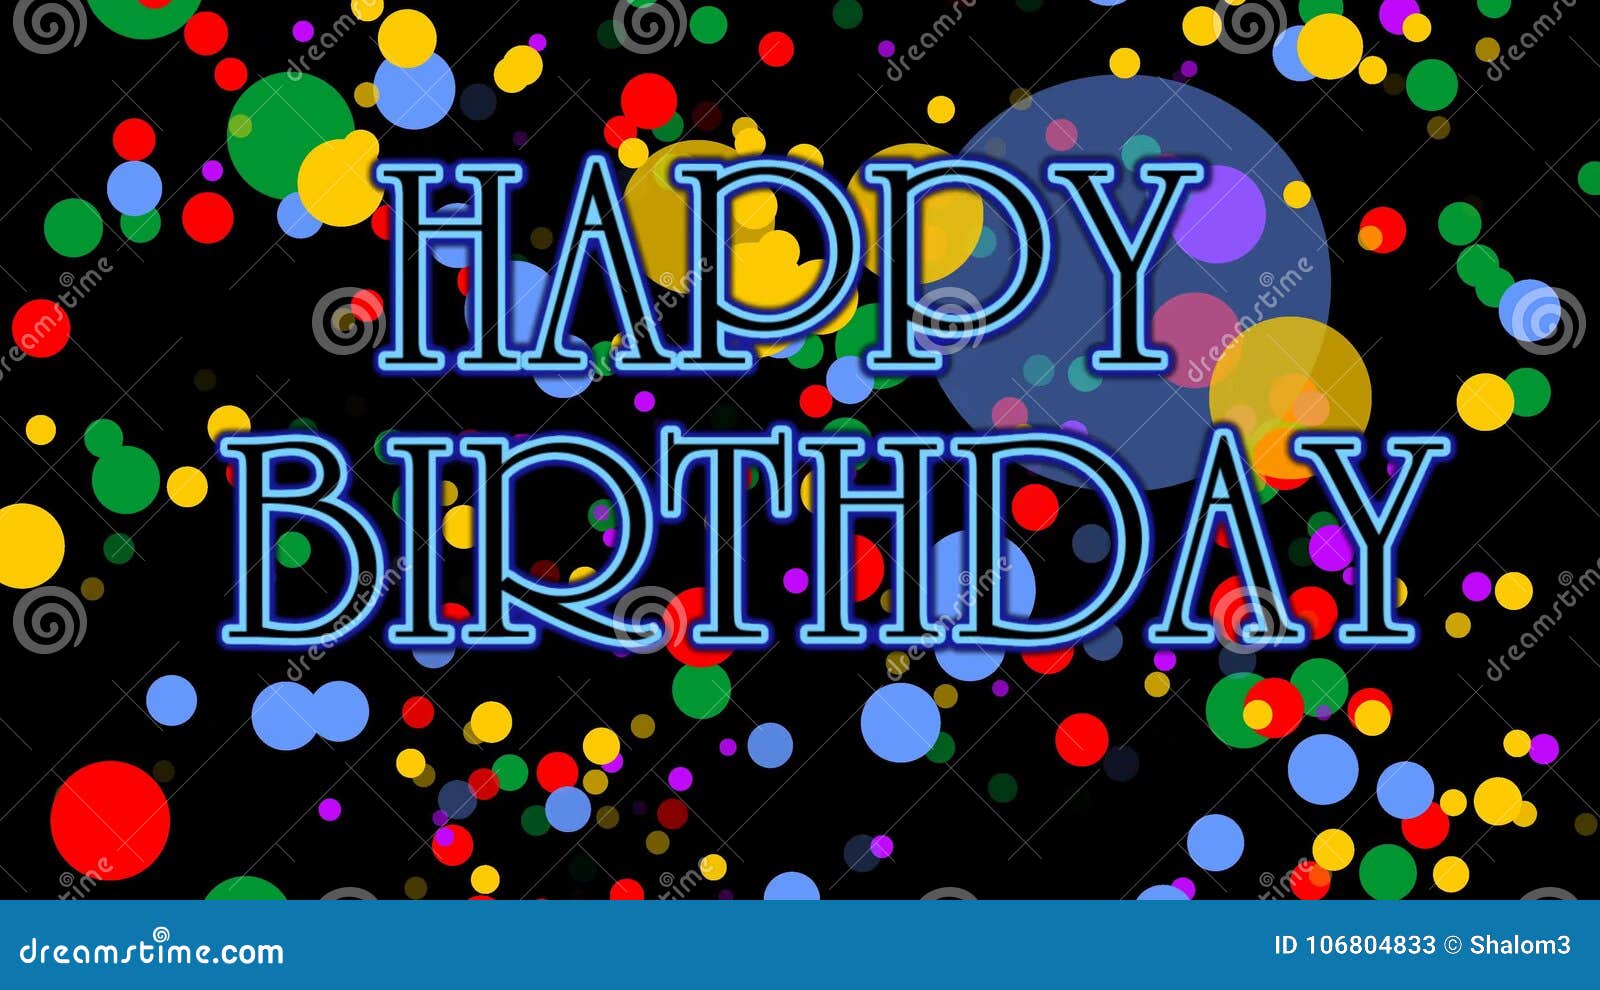 Get ready to celebrate with a Happy Birthday banner that features a confetti background! This animated banner will make your party shine with bright, colorful charm that\'s sure to put your guests in a festive mood.